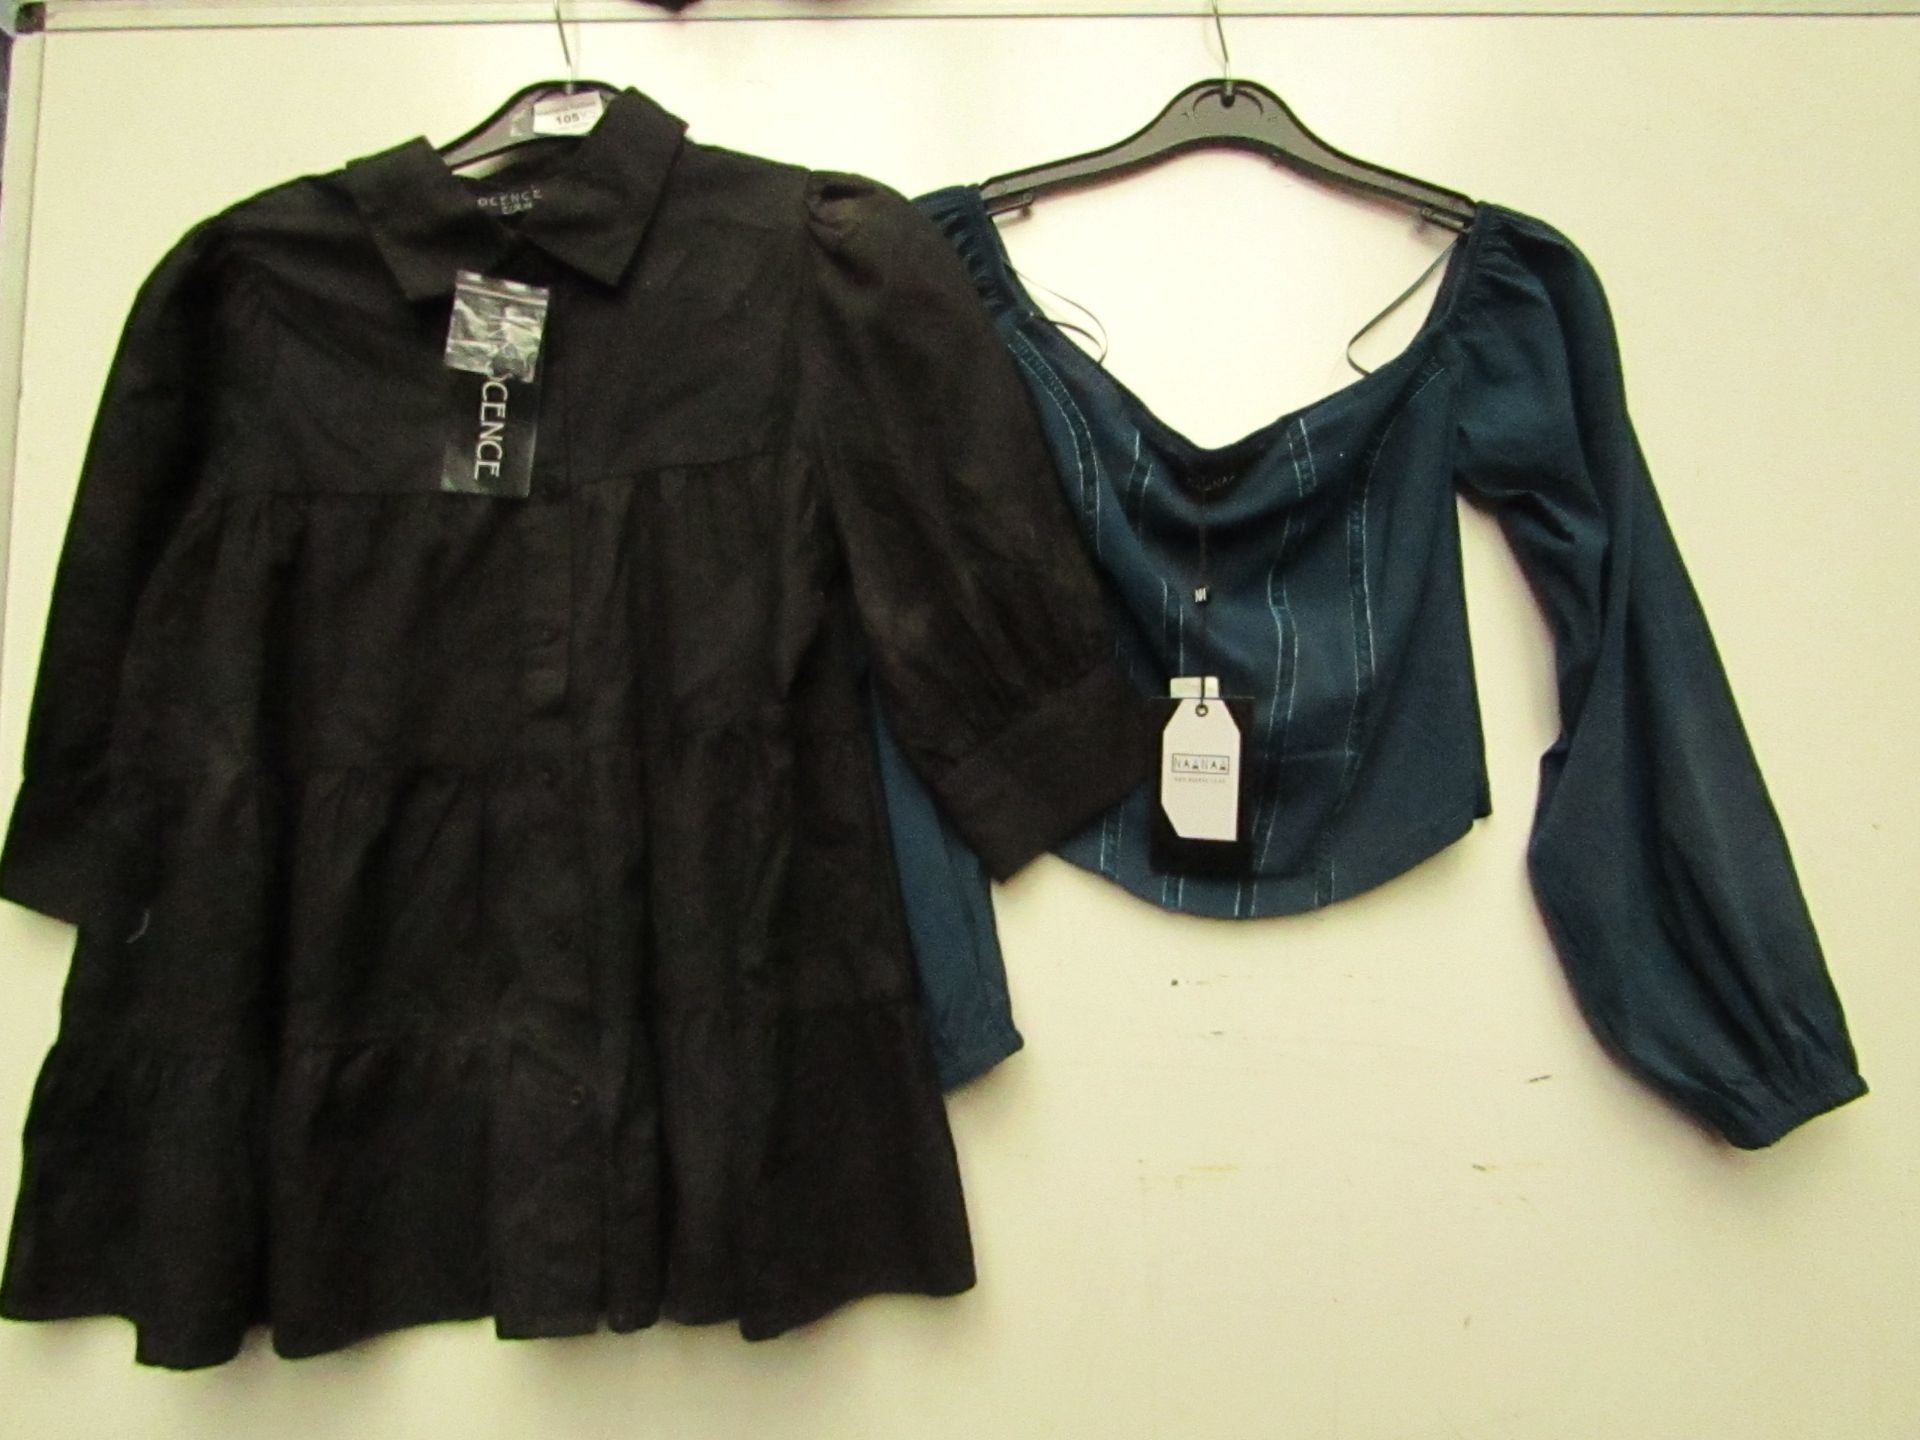 Tiered Black Shirt Size 8, New with tags & a Corset Crop Top Size 8. New with tags